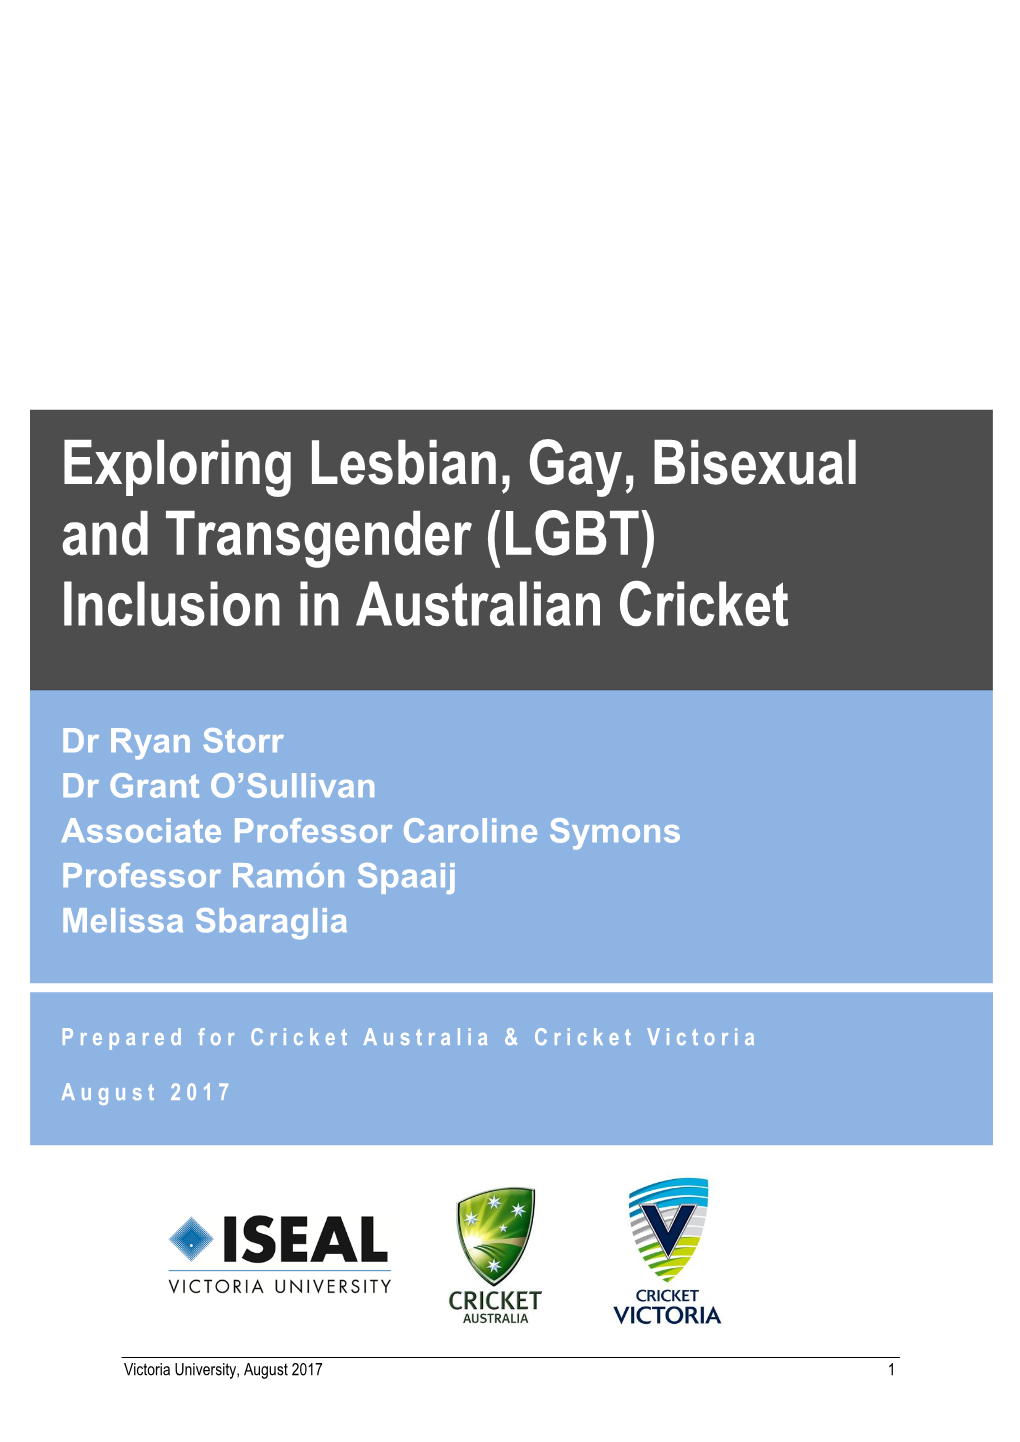 Exploring Lesbian, Gay, Bisexual and Transgender (LGBT) Inclusion in Australian Cricket